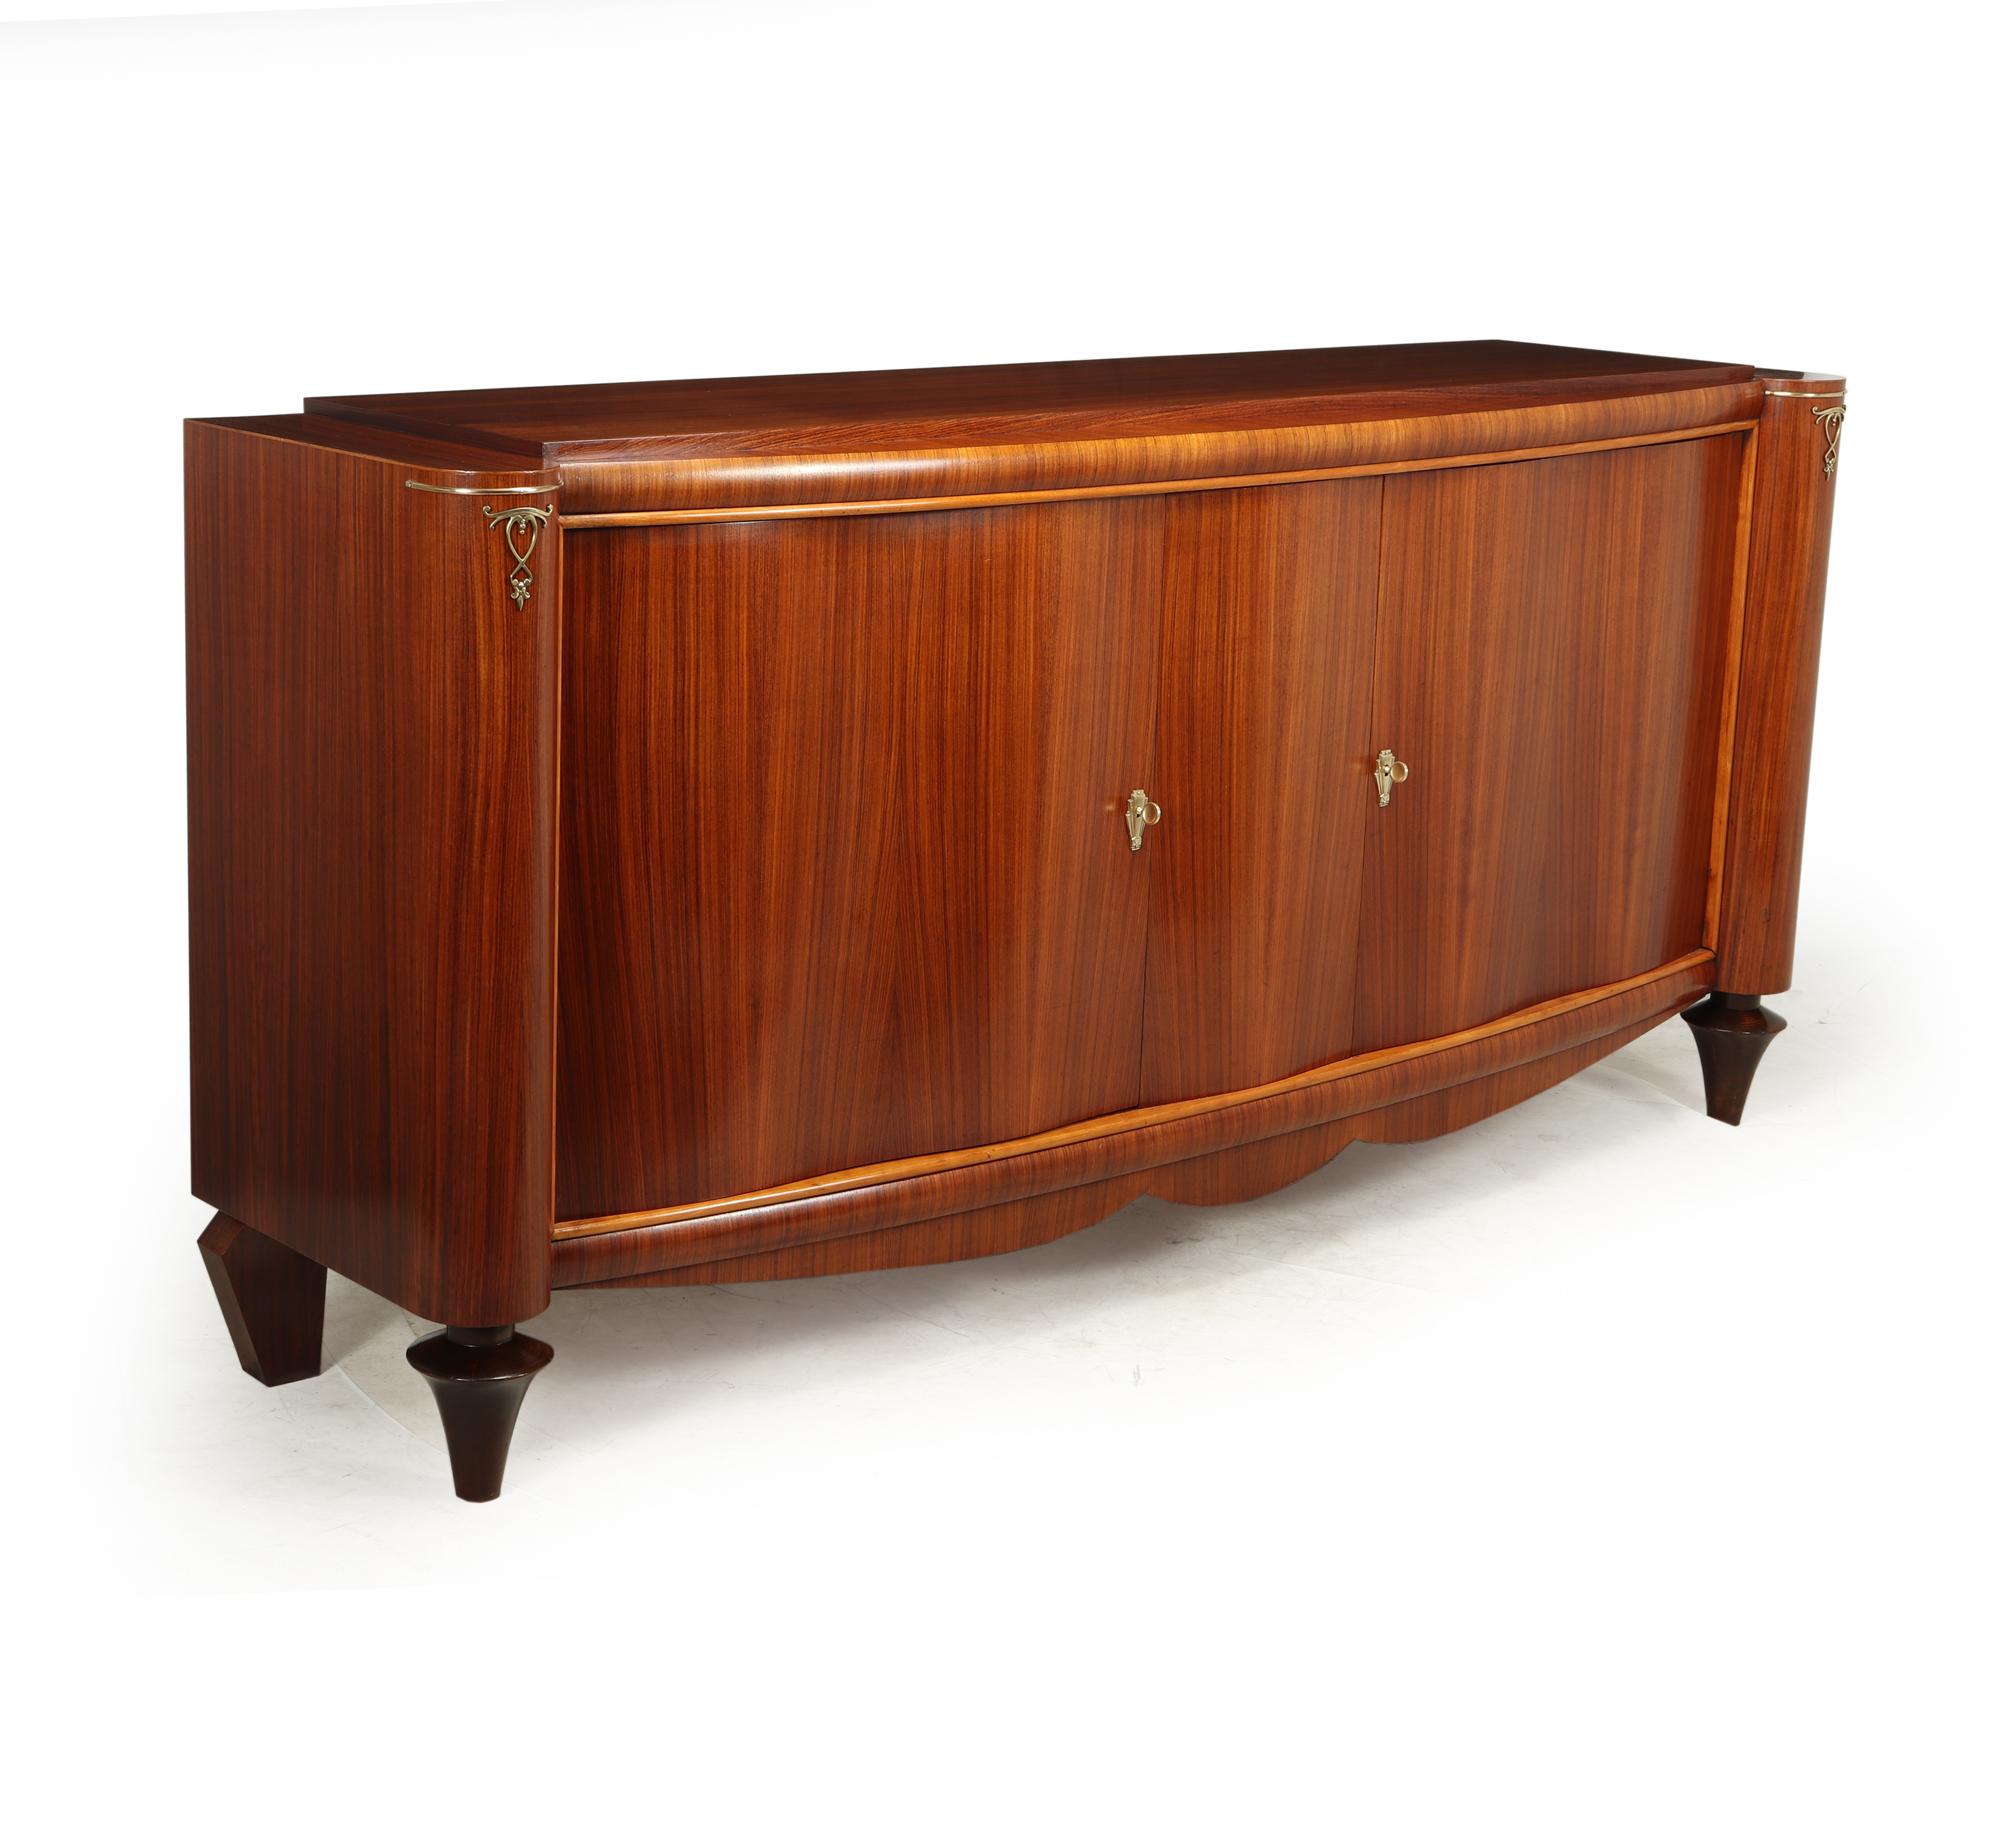 Mid-20th Century French Art Deco Sideboard in Palisander